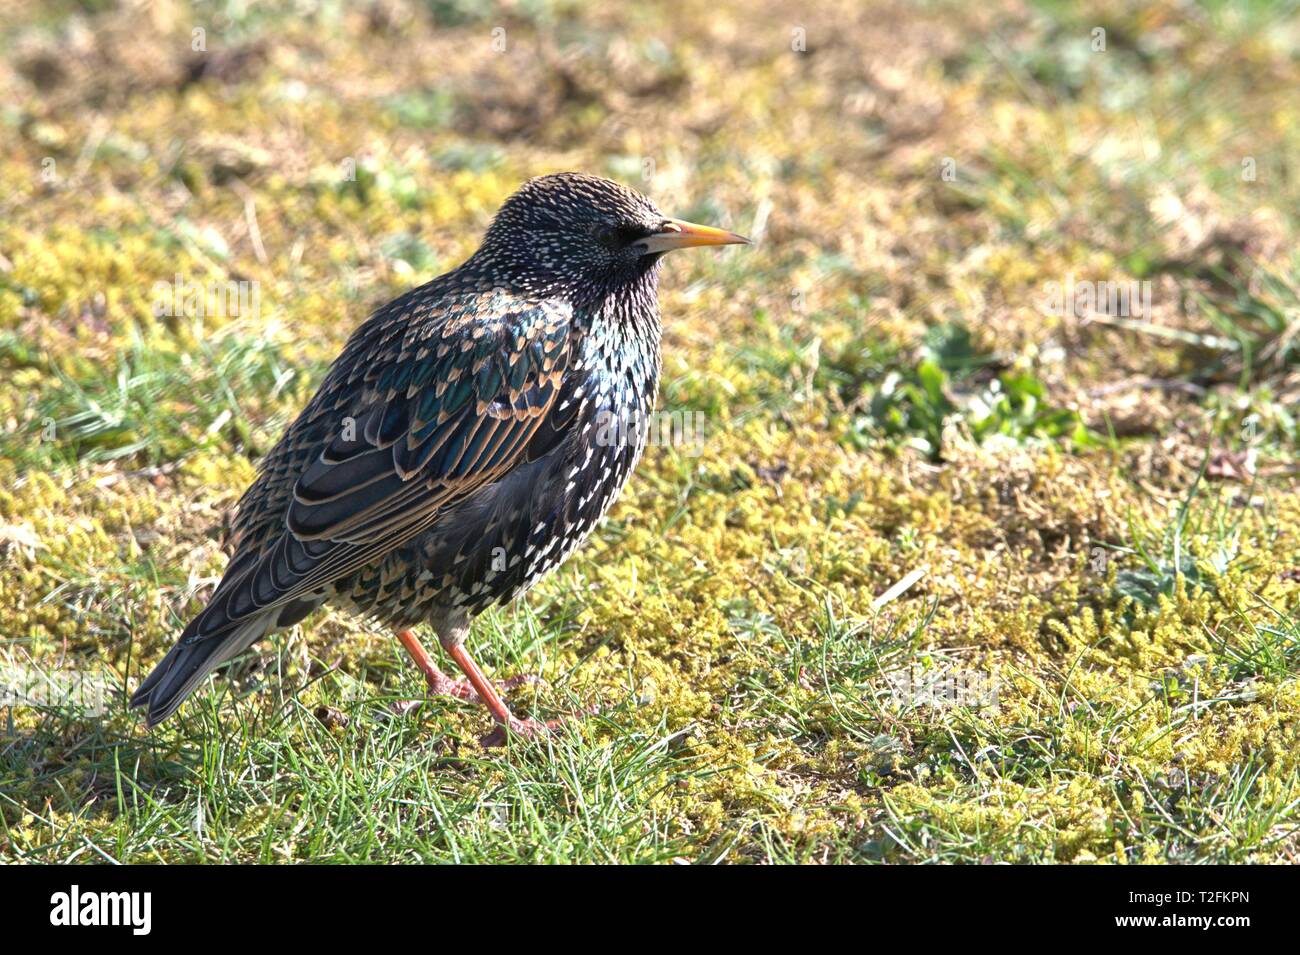 Schleswig, Deutschland. 31st Mar, 2019. A star (Sturnus vulgaris) in the transition from a simple dress to a magnificent dress while foraging on the ground on the Konigswiesen in Schleswig. Order: Passeriformes, Suborder: Songbird (Passeri), Family: Stare (Sturnidae), Subfamily: Sturninae, Genus: Sturnus, Species: Star | usage worldwide Credit: dpa/Alamy Live News Stock Photo